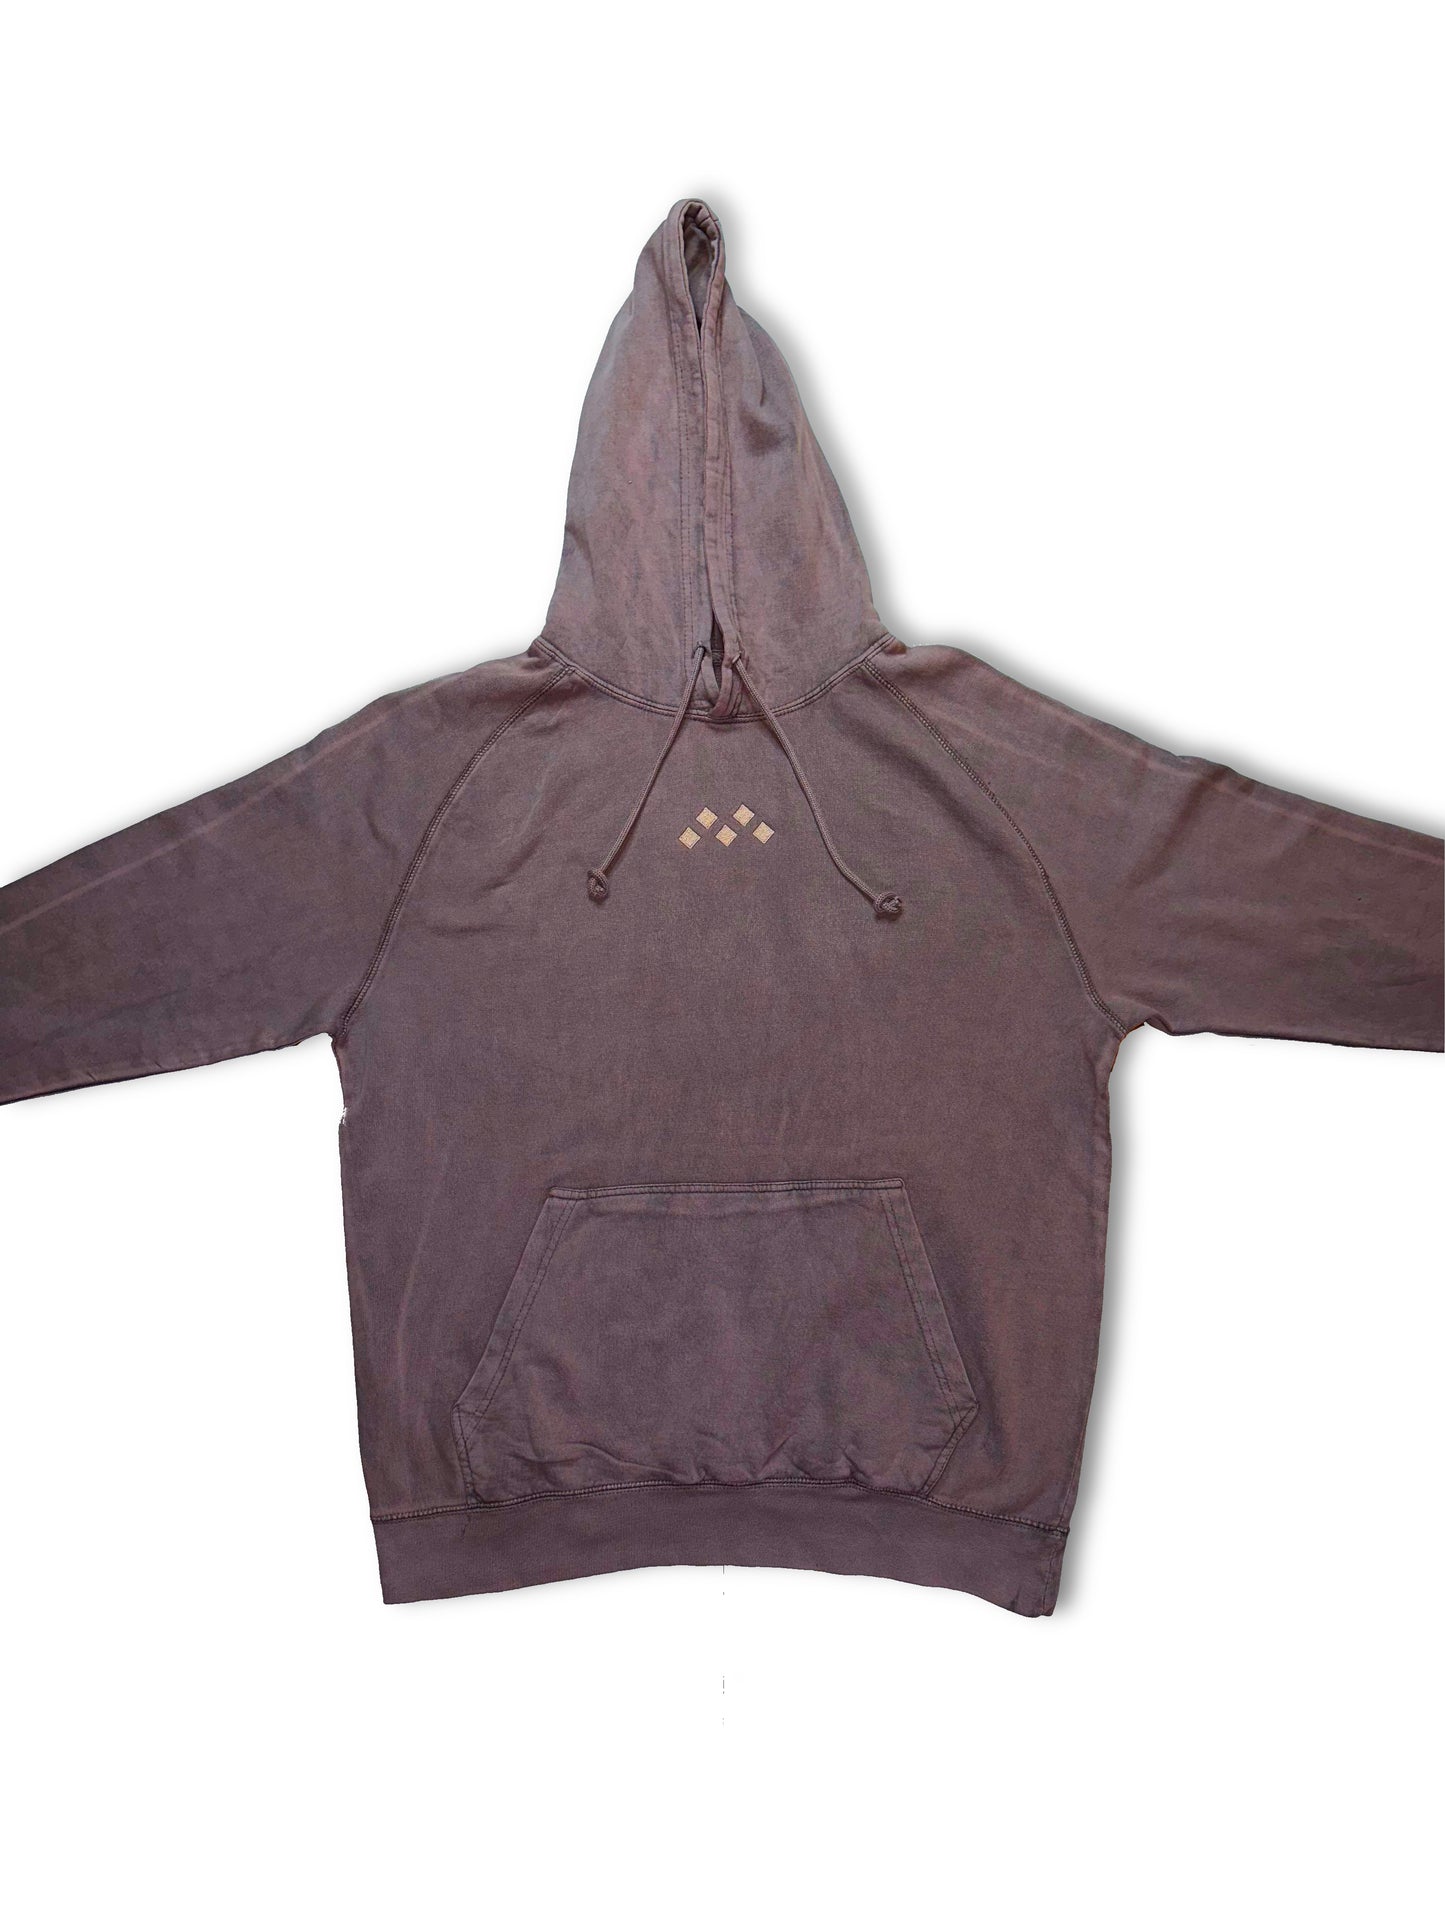 Vived-Mota Co. Embroidered Vintage Mineral Wash Hoodie “Dusty Mauve”